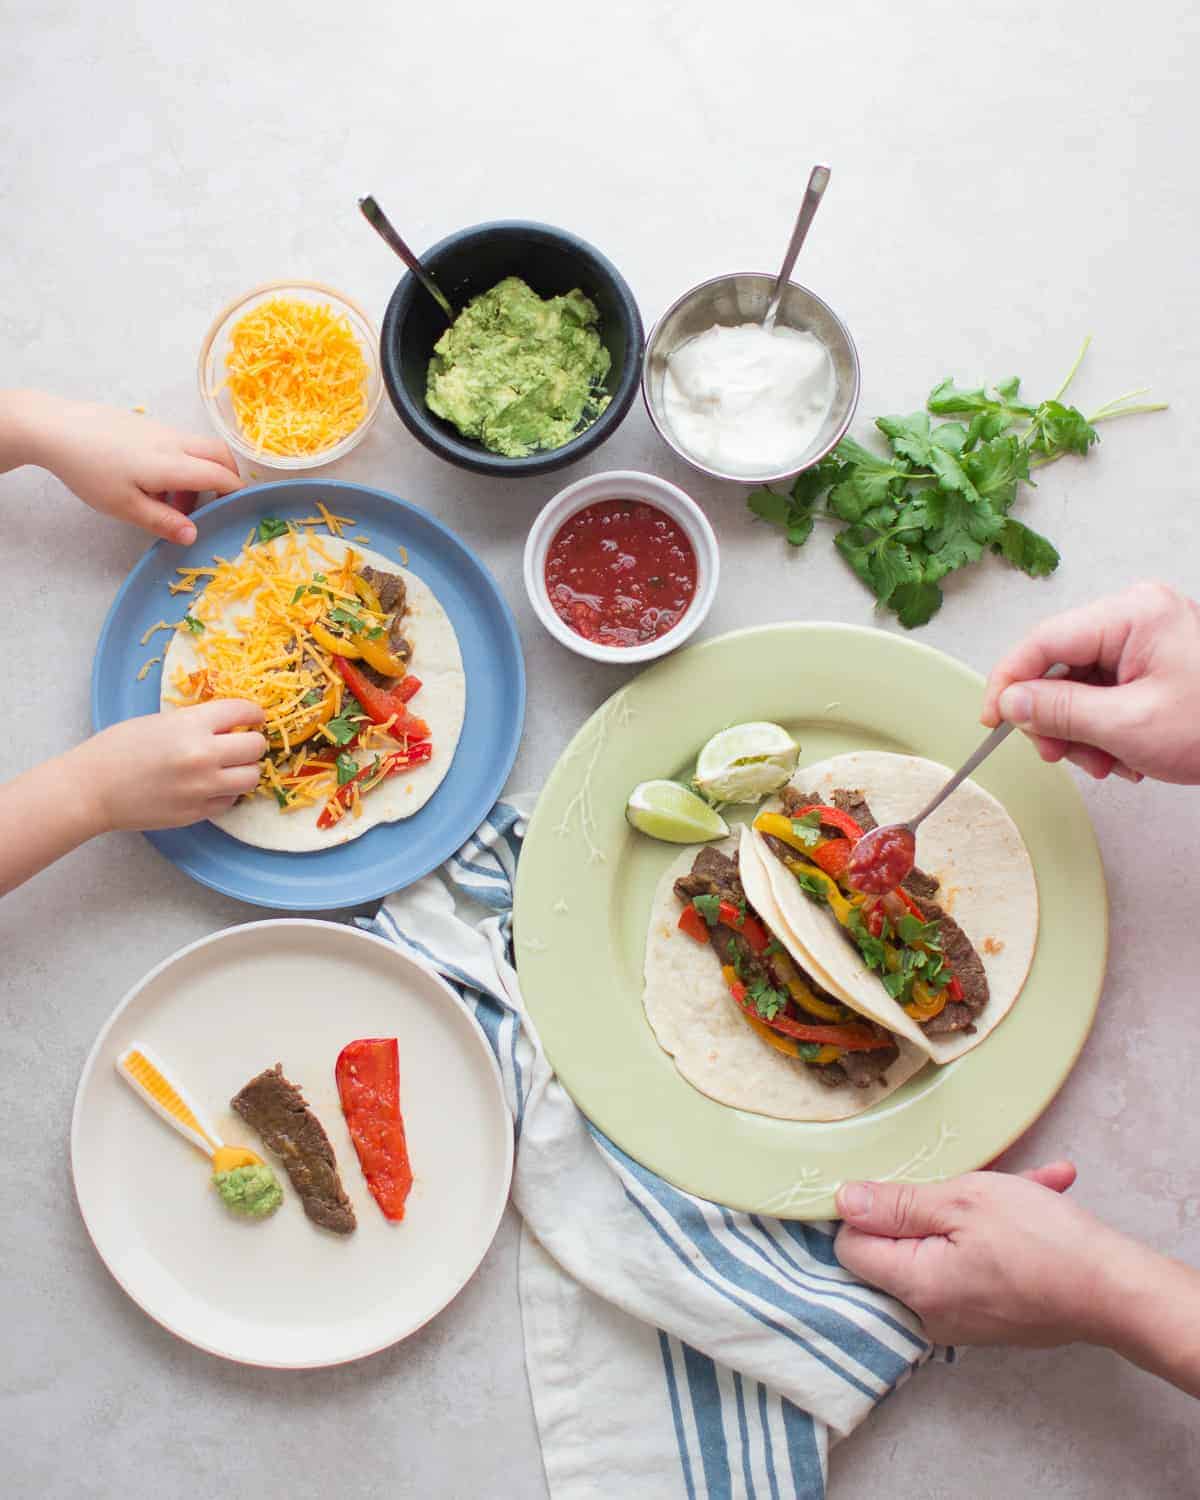 flank steak fajitas served family-style with an assortment of toppings and toddler, baby, and adult's plate with tortilla.